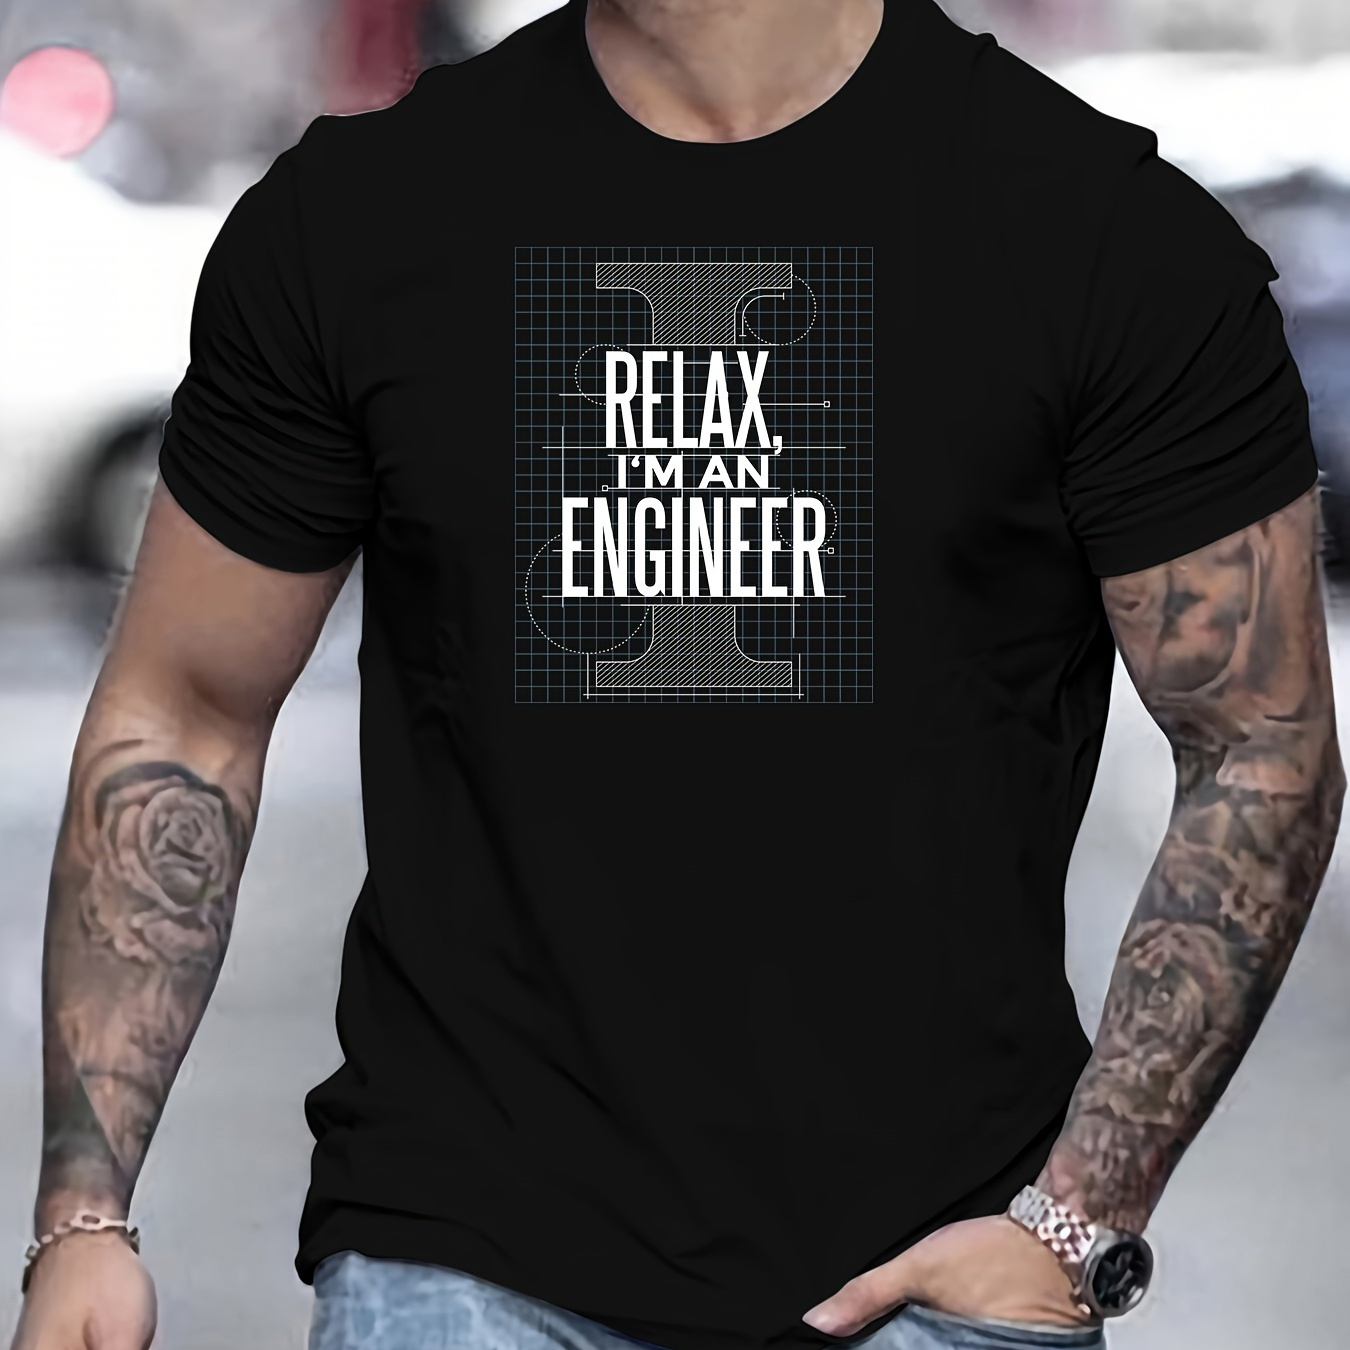 

Relax I Am An Engineer Print, Men's Round Crew Neck Short Sleeve, Simple Style Tee Fashion Regular Fit T-shirt, Casual Comfy Top For Spring Summer Holiday Leisure Vacation Men's Clothing As Gift